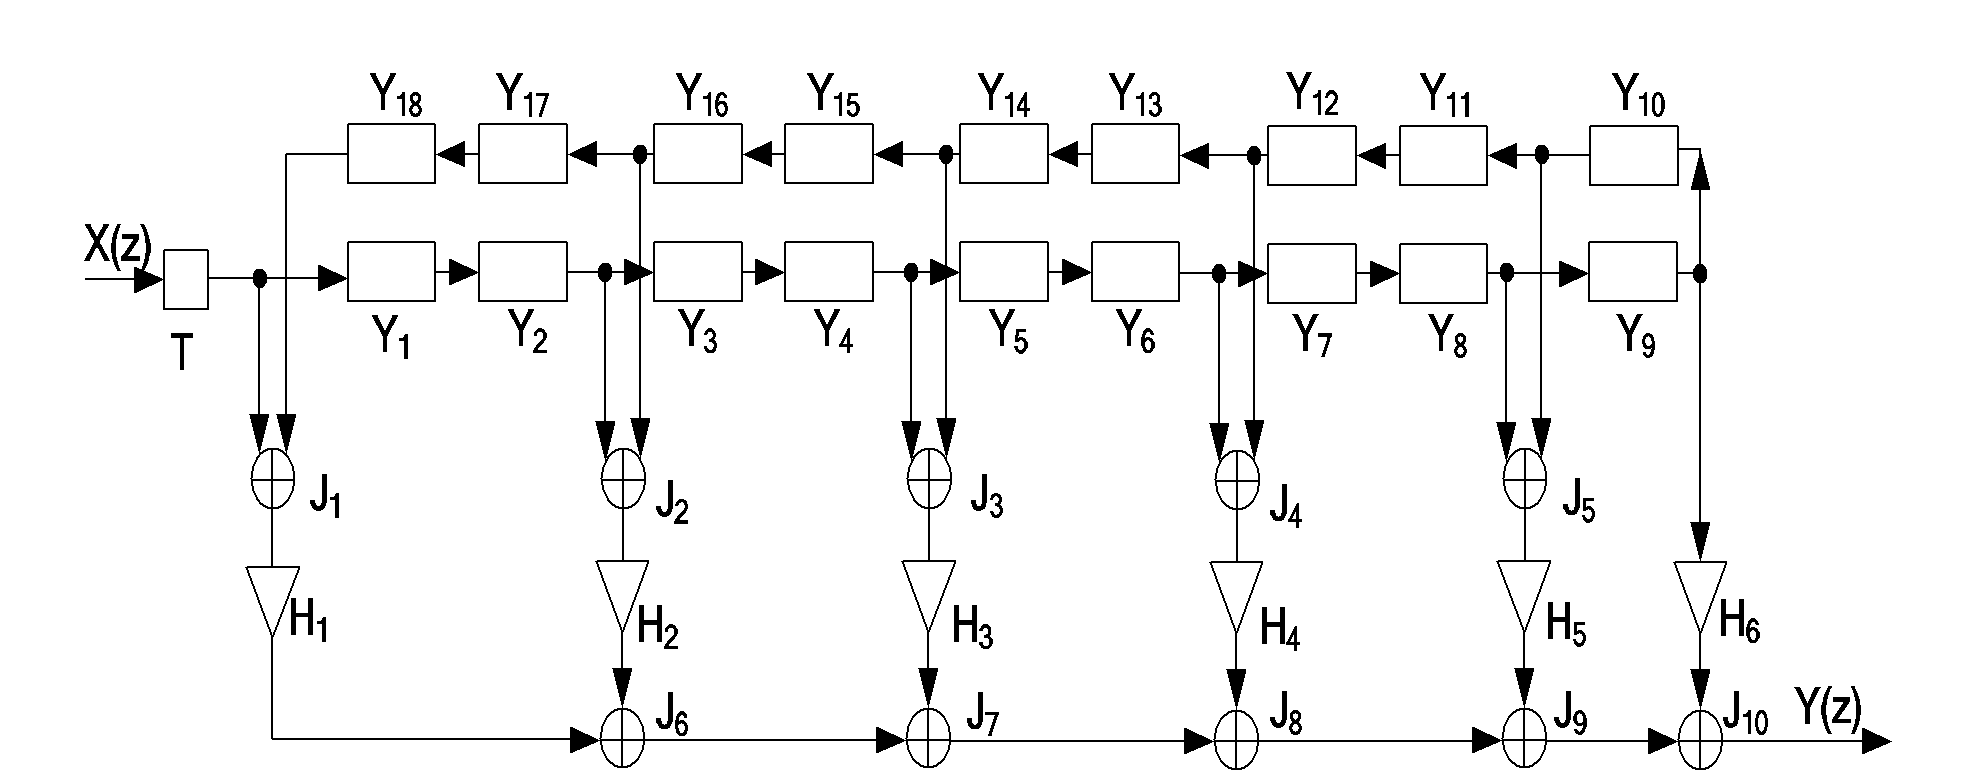 Low-power-consumption multi-order interpolation half-band filter with two-phase structure